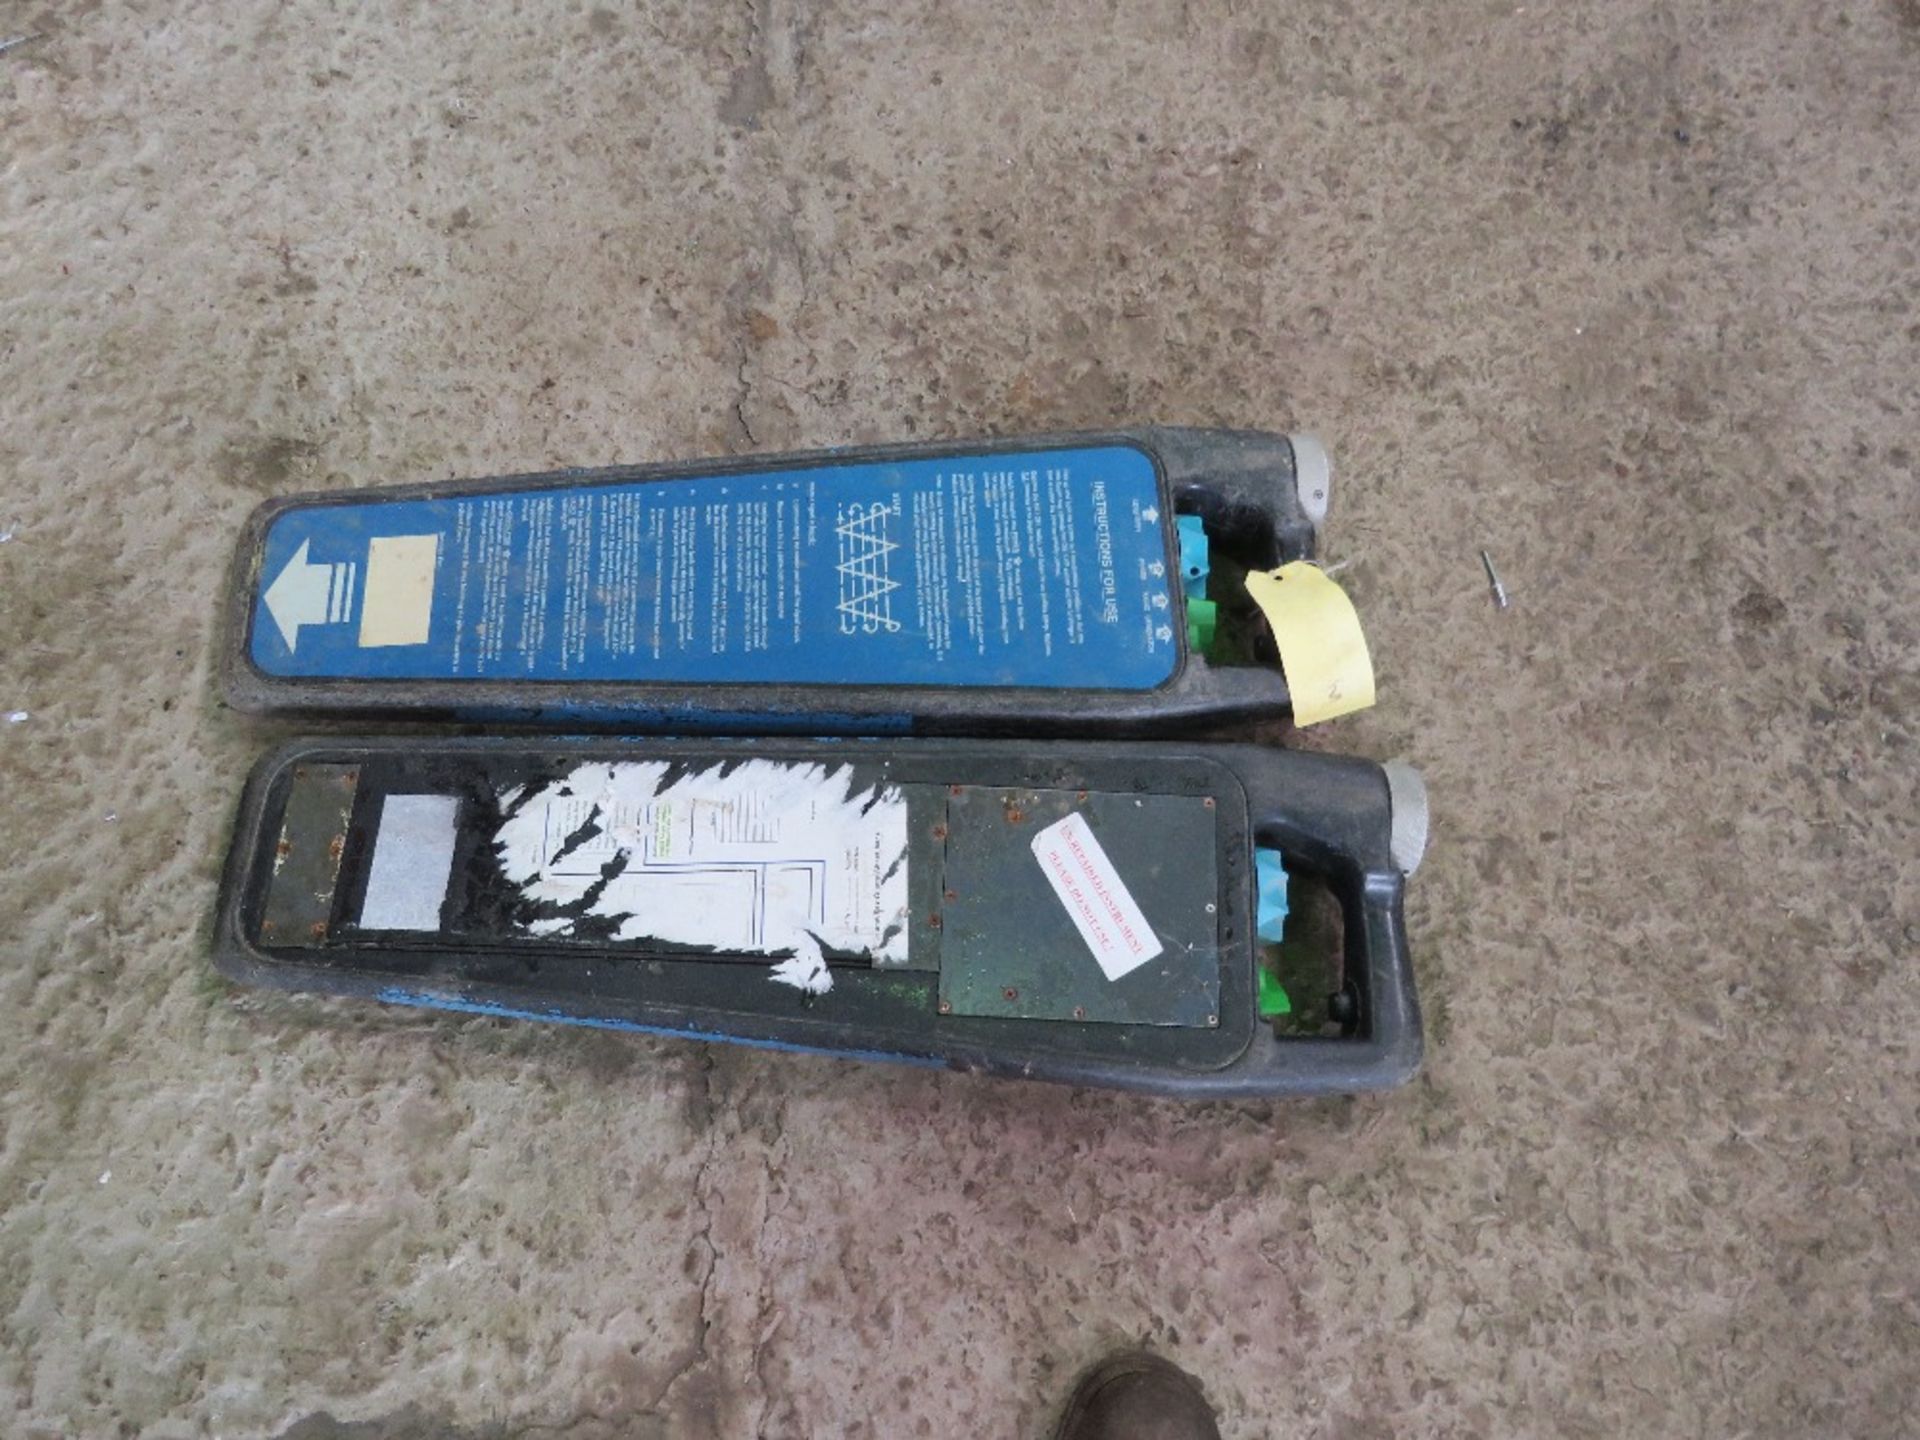 2 X CABLE DETECTORS, COVER PLATES MISSING. DIRECT FROM A LOCAL GROUNDWORKS COMPANY AS PART OF THE - Image 2 of 2